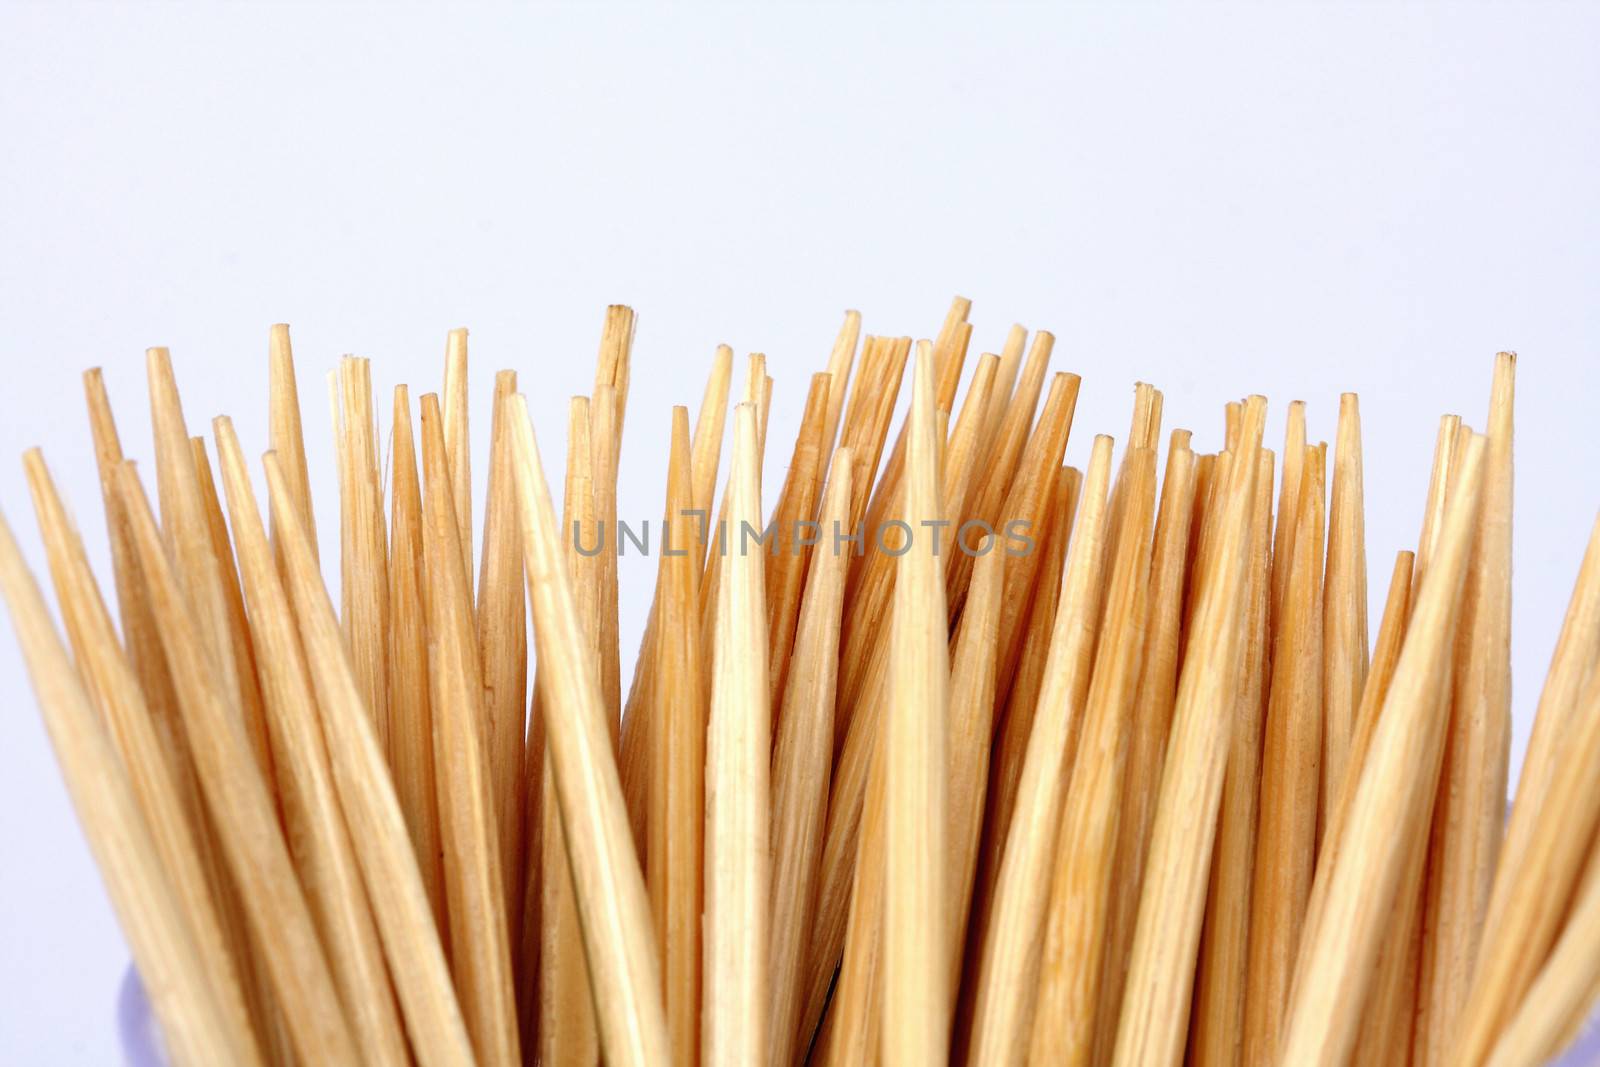 toothpicks in the bank on a white background by myrainjom01